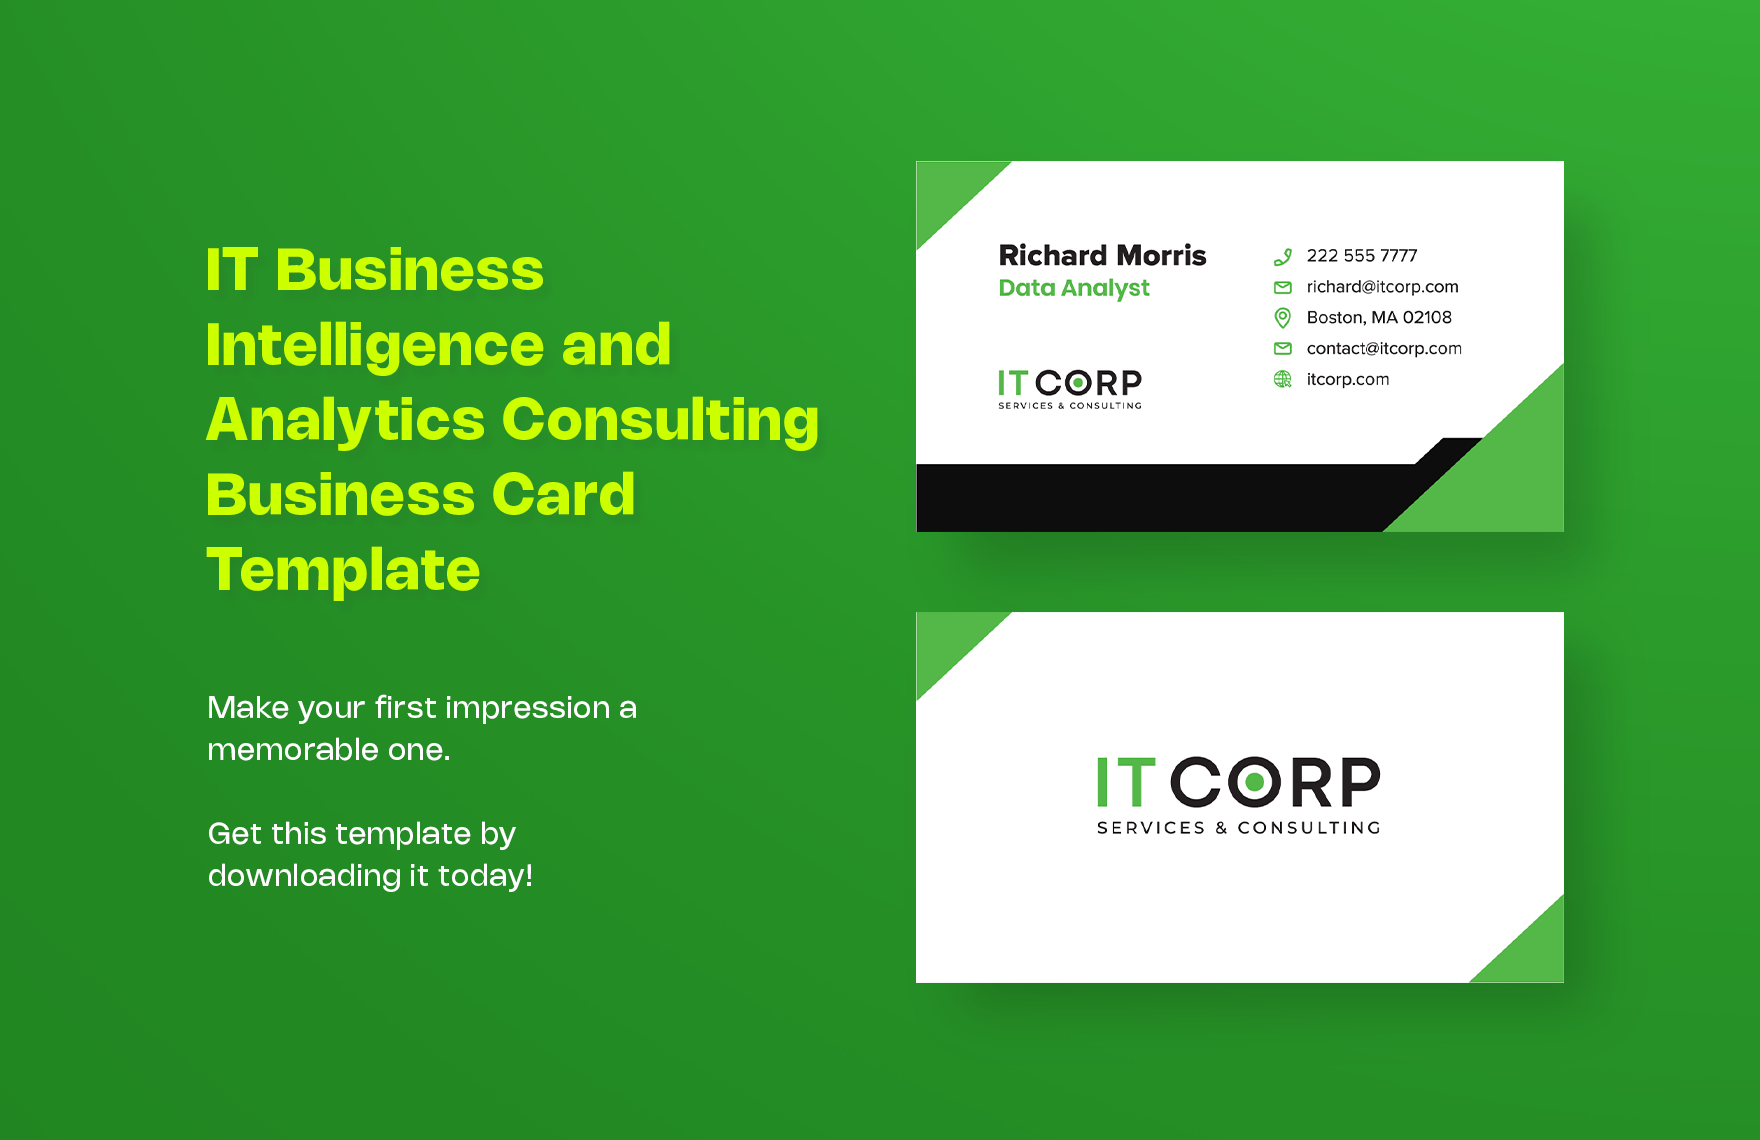 IT Business Intelligence & Analytics Consulting Business Card Template in Word, Illustrator, PSD